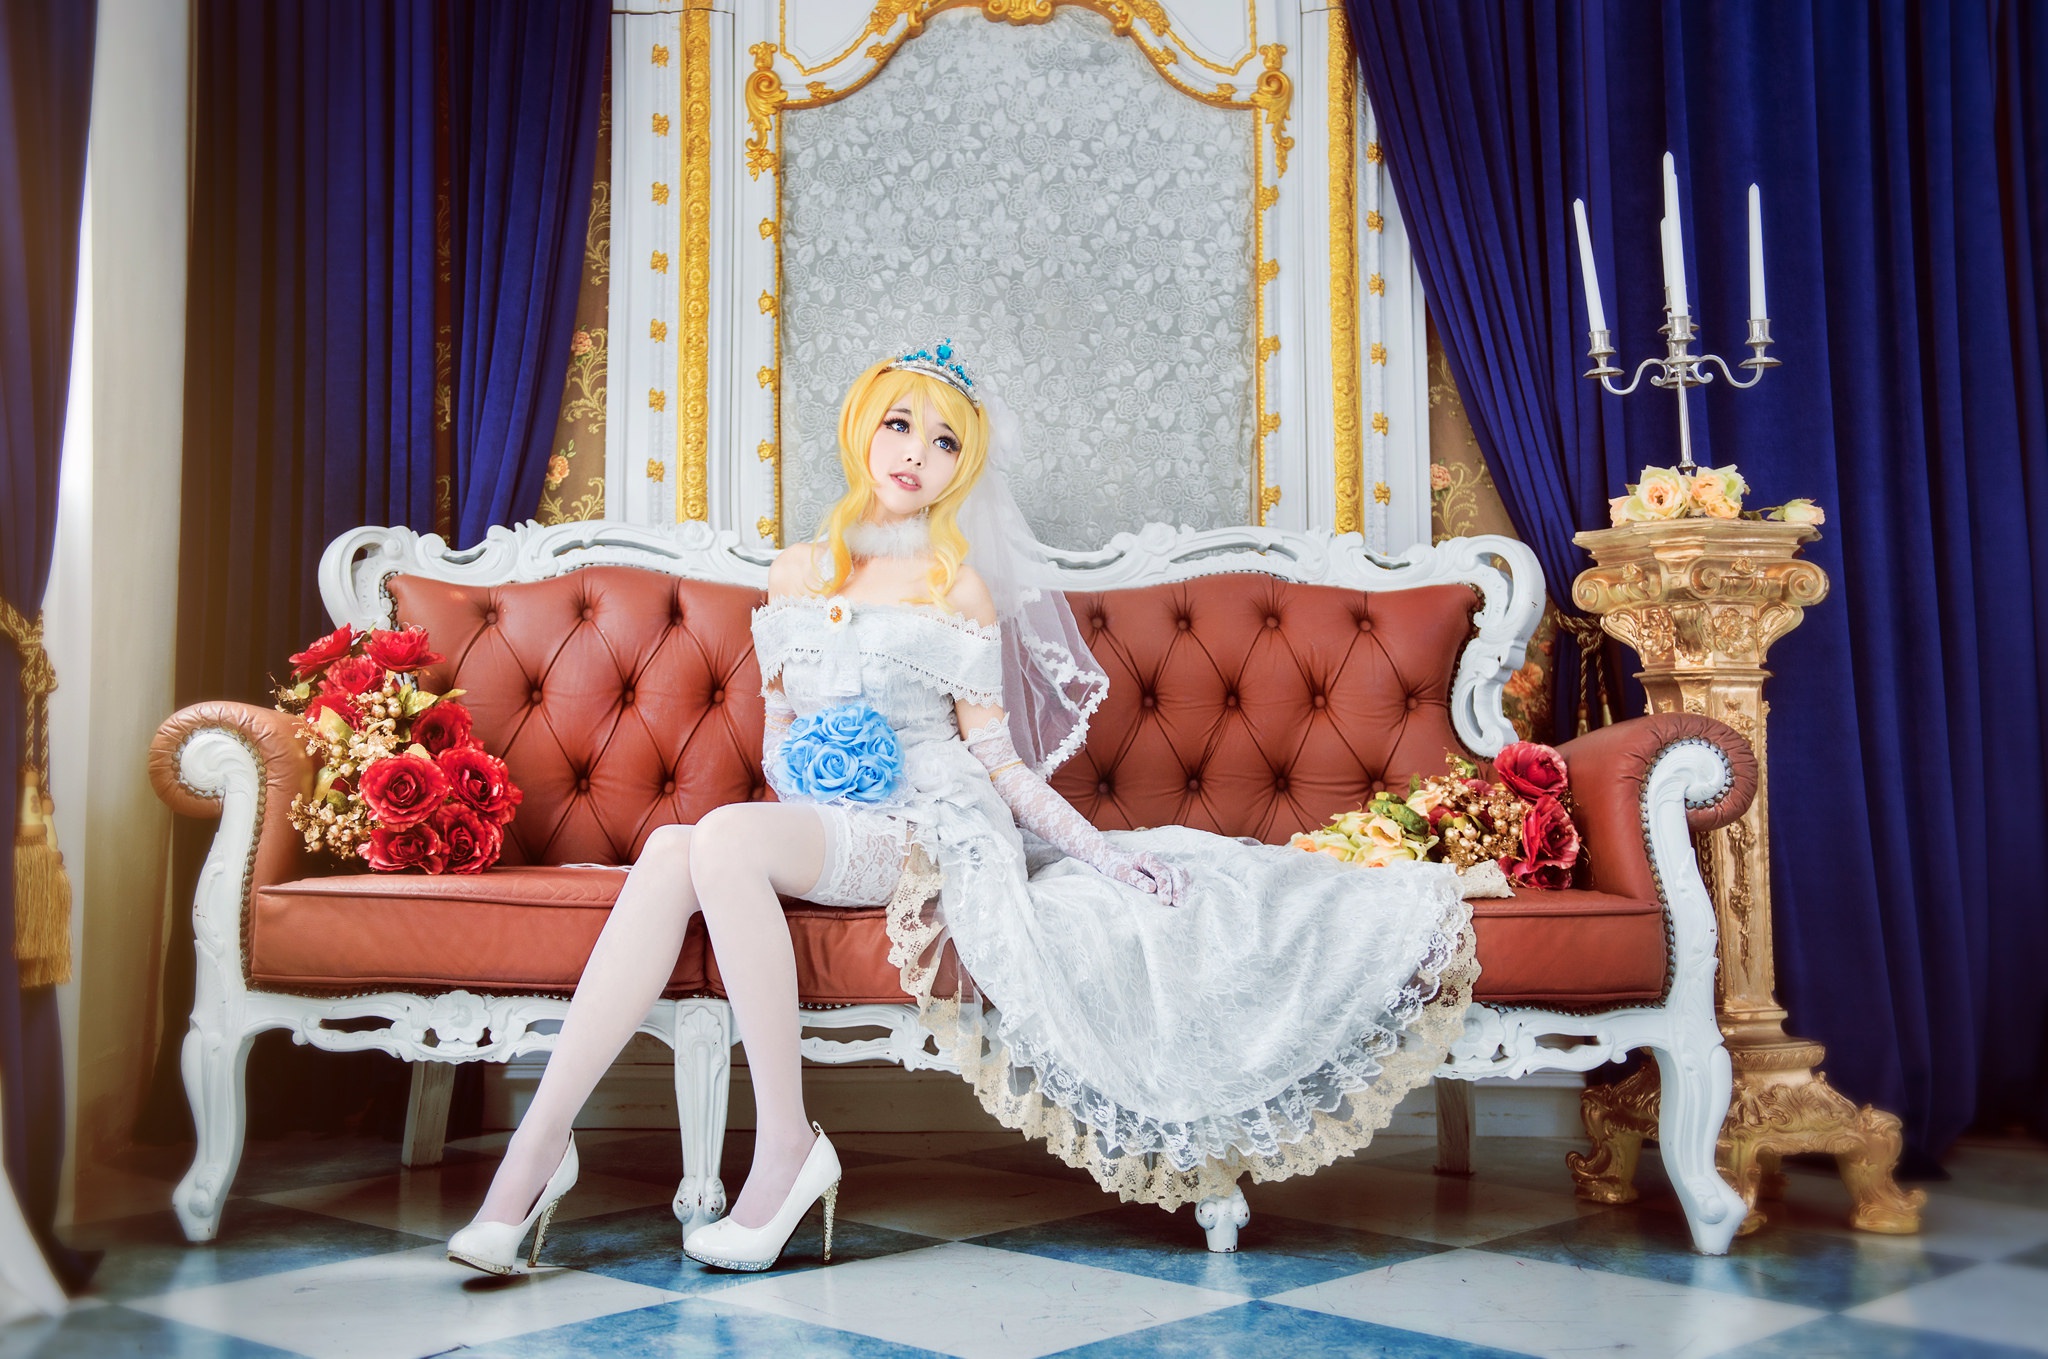 People 2048x1359 Asian model women long hair blonde couch candle holder candles curtains white high heels nylons dress veils crown flowers bare shoulders sitting